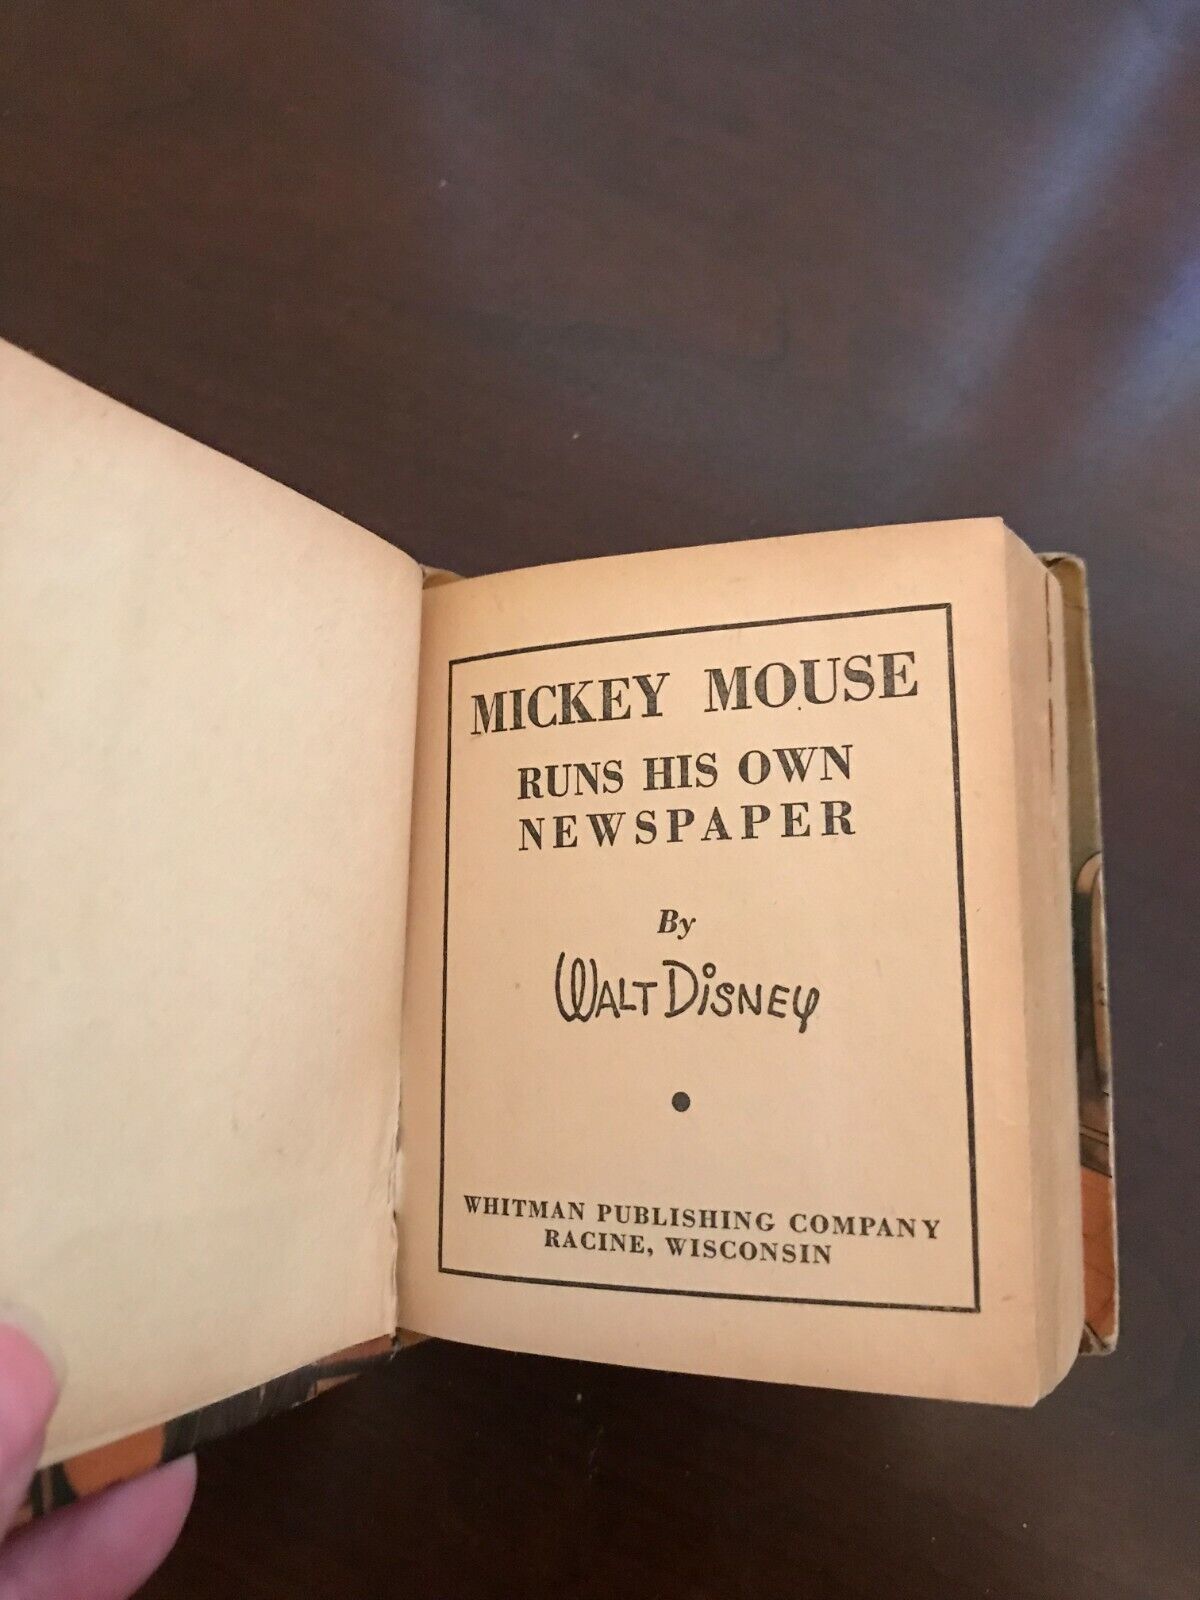 Disney vintage books - The Big Little Book featuring Mickey Mouse Без бренда - фотография #5